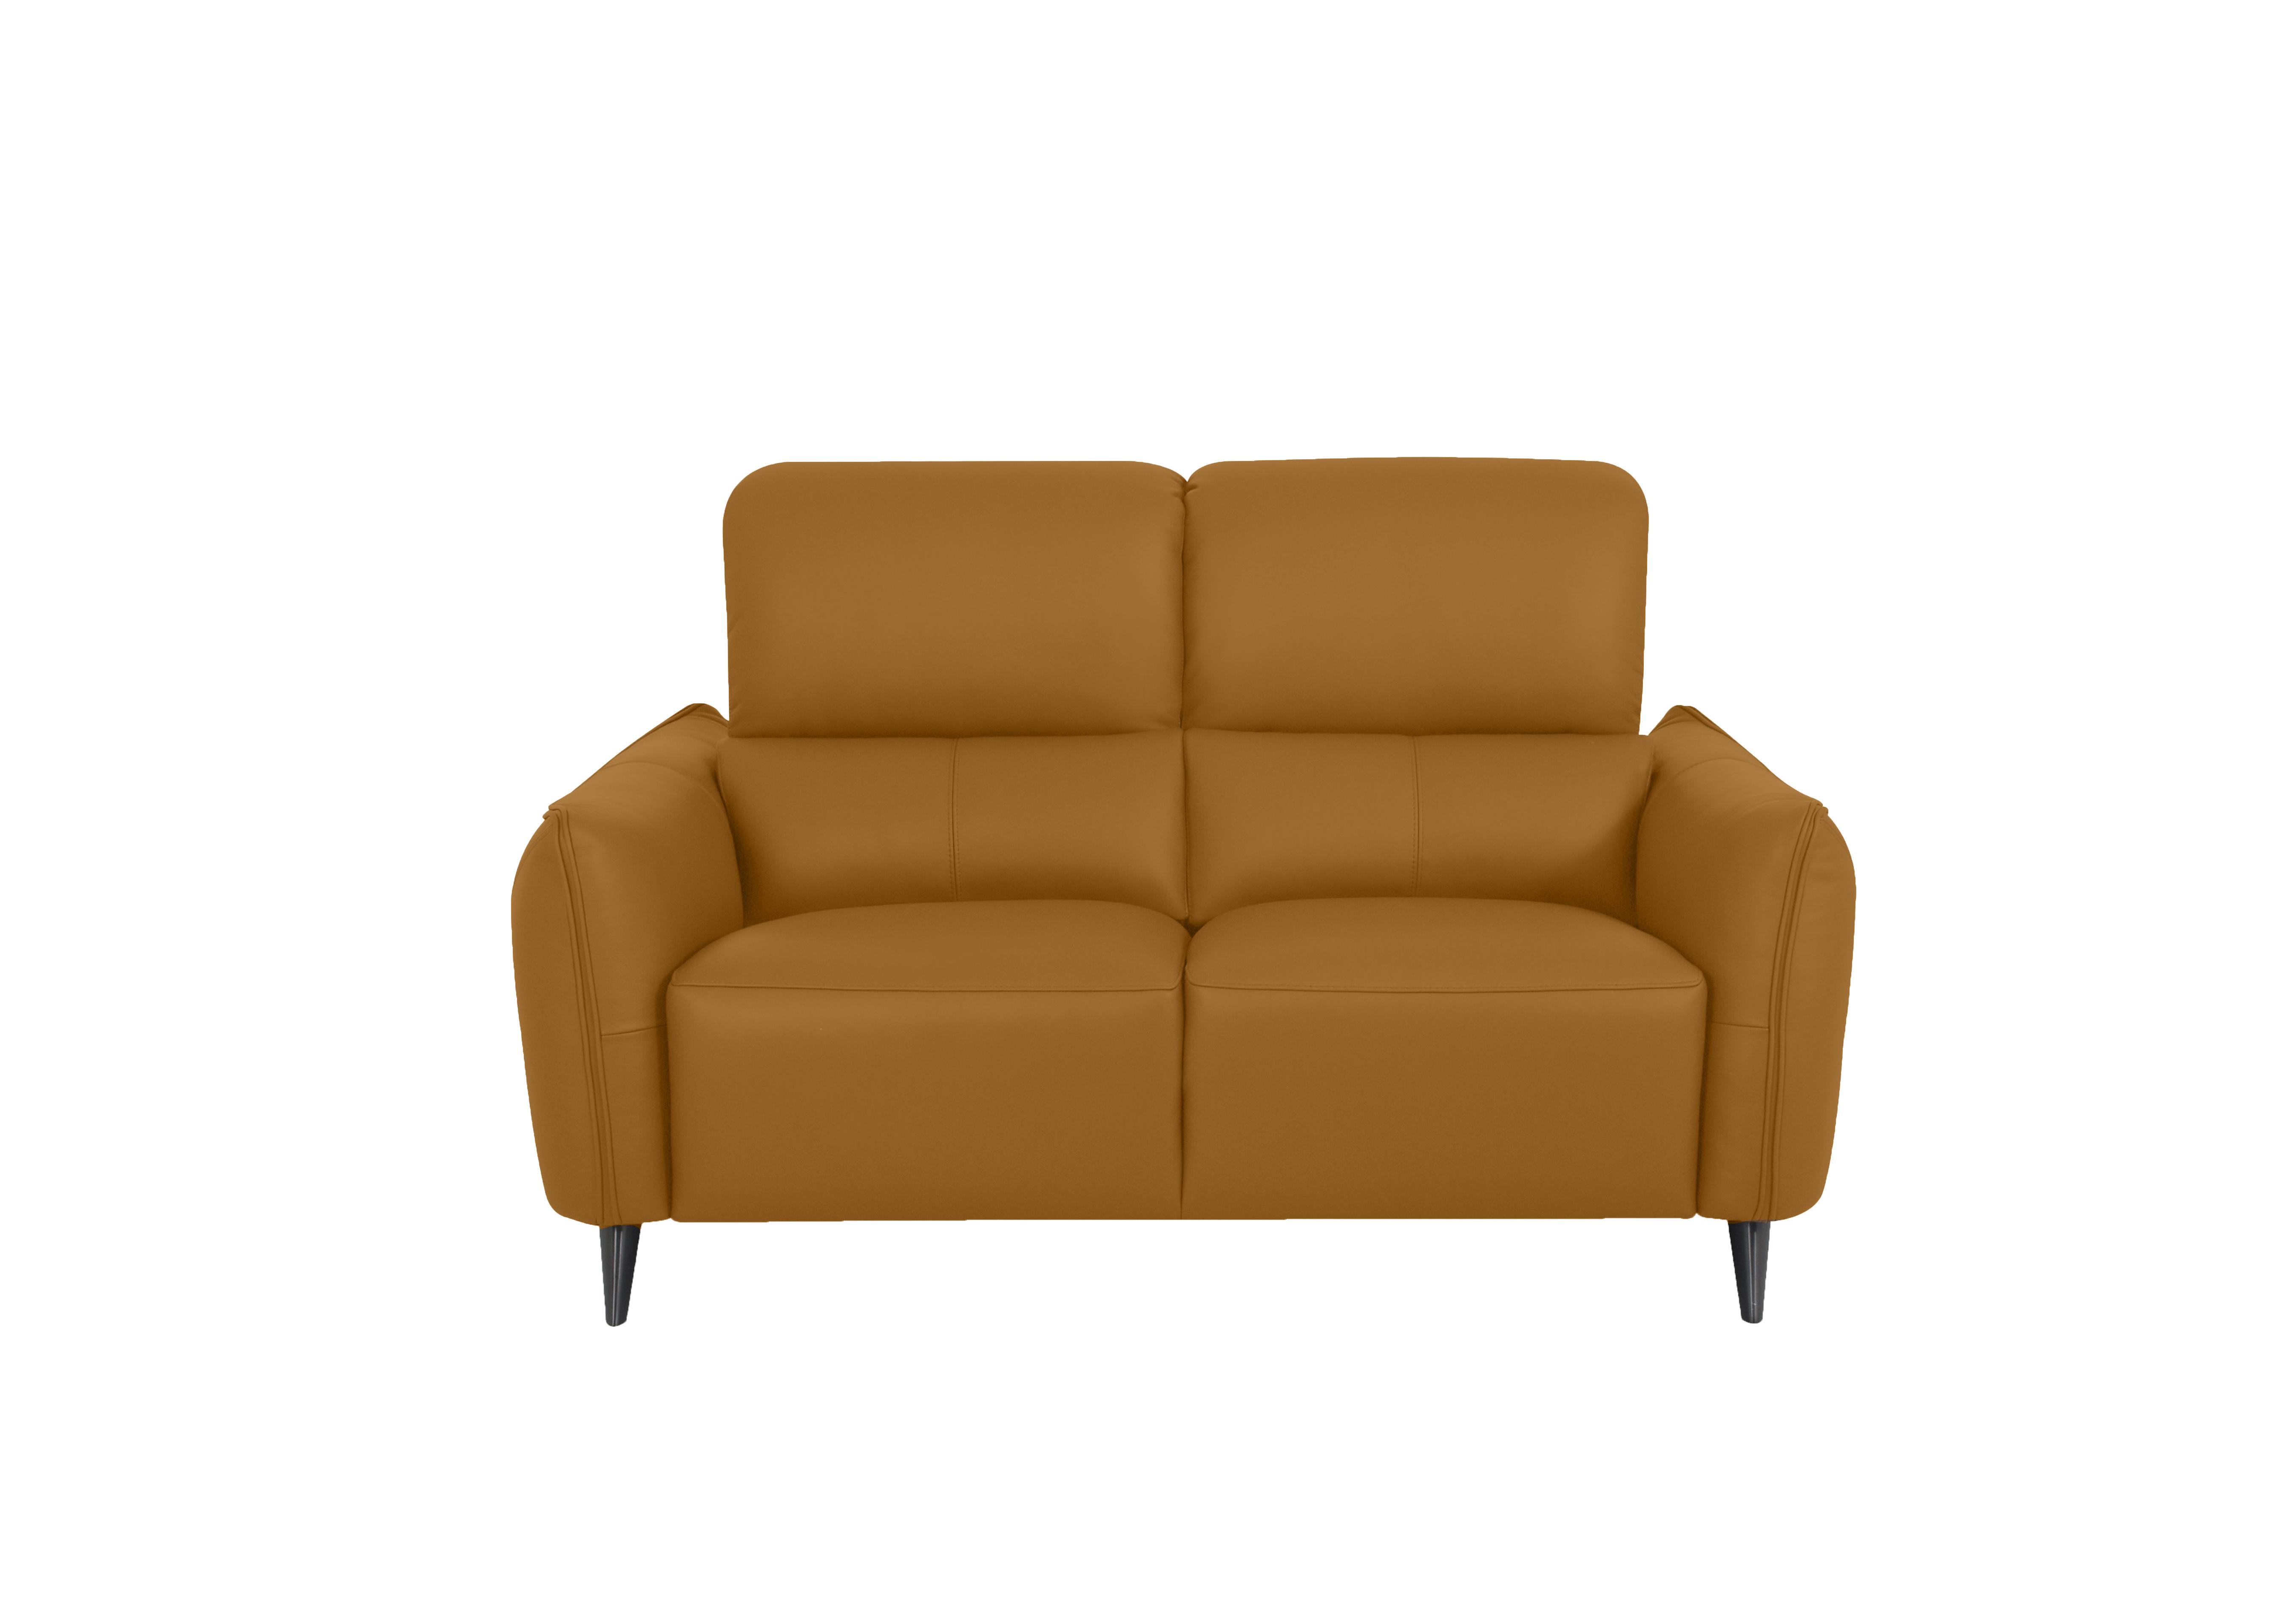 Maddox 2 Seater Leather Sofa in Np-606e Honey Yellow on Furniture Village